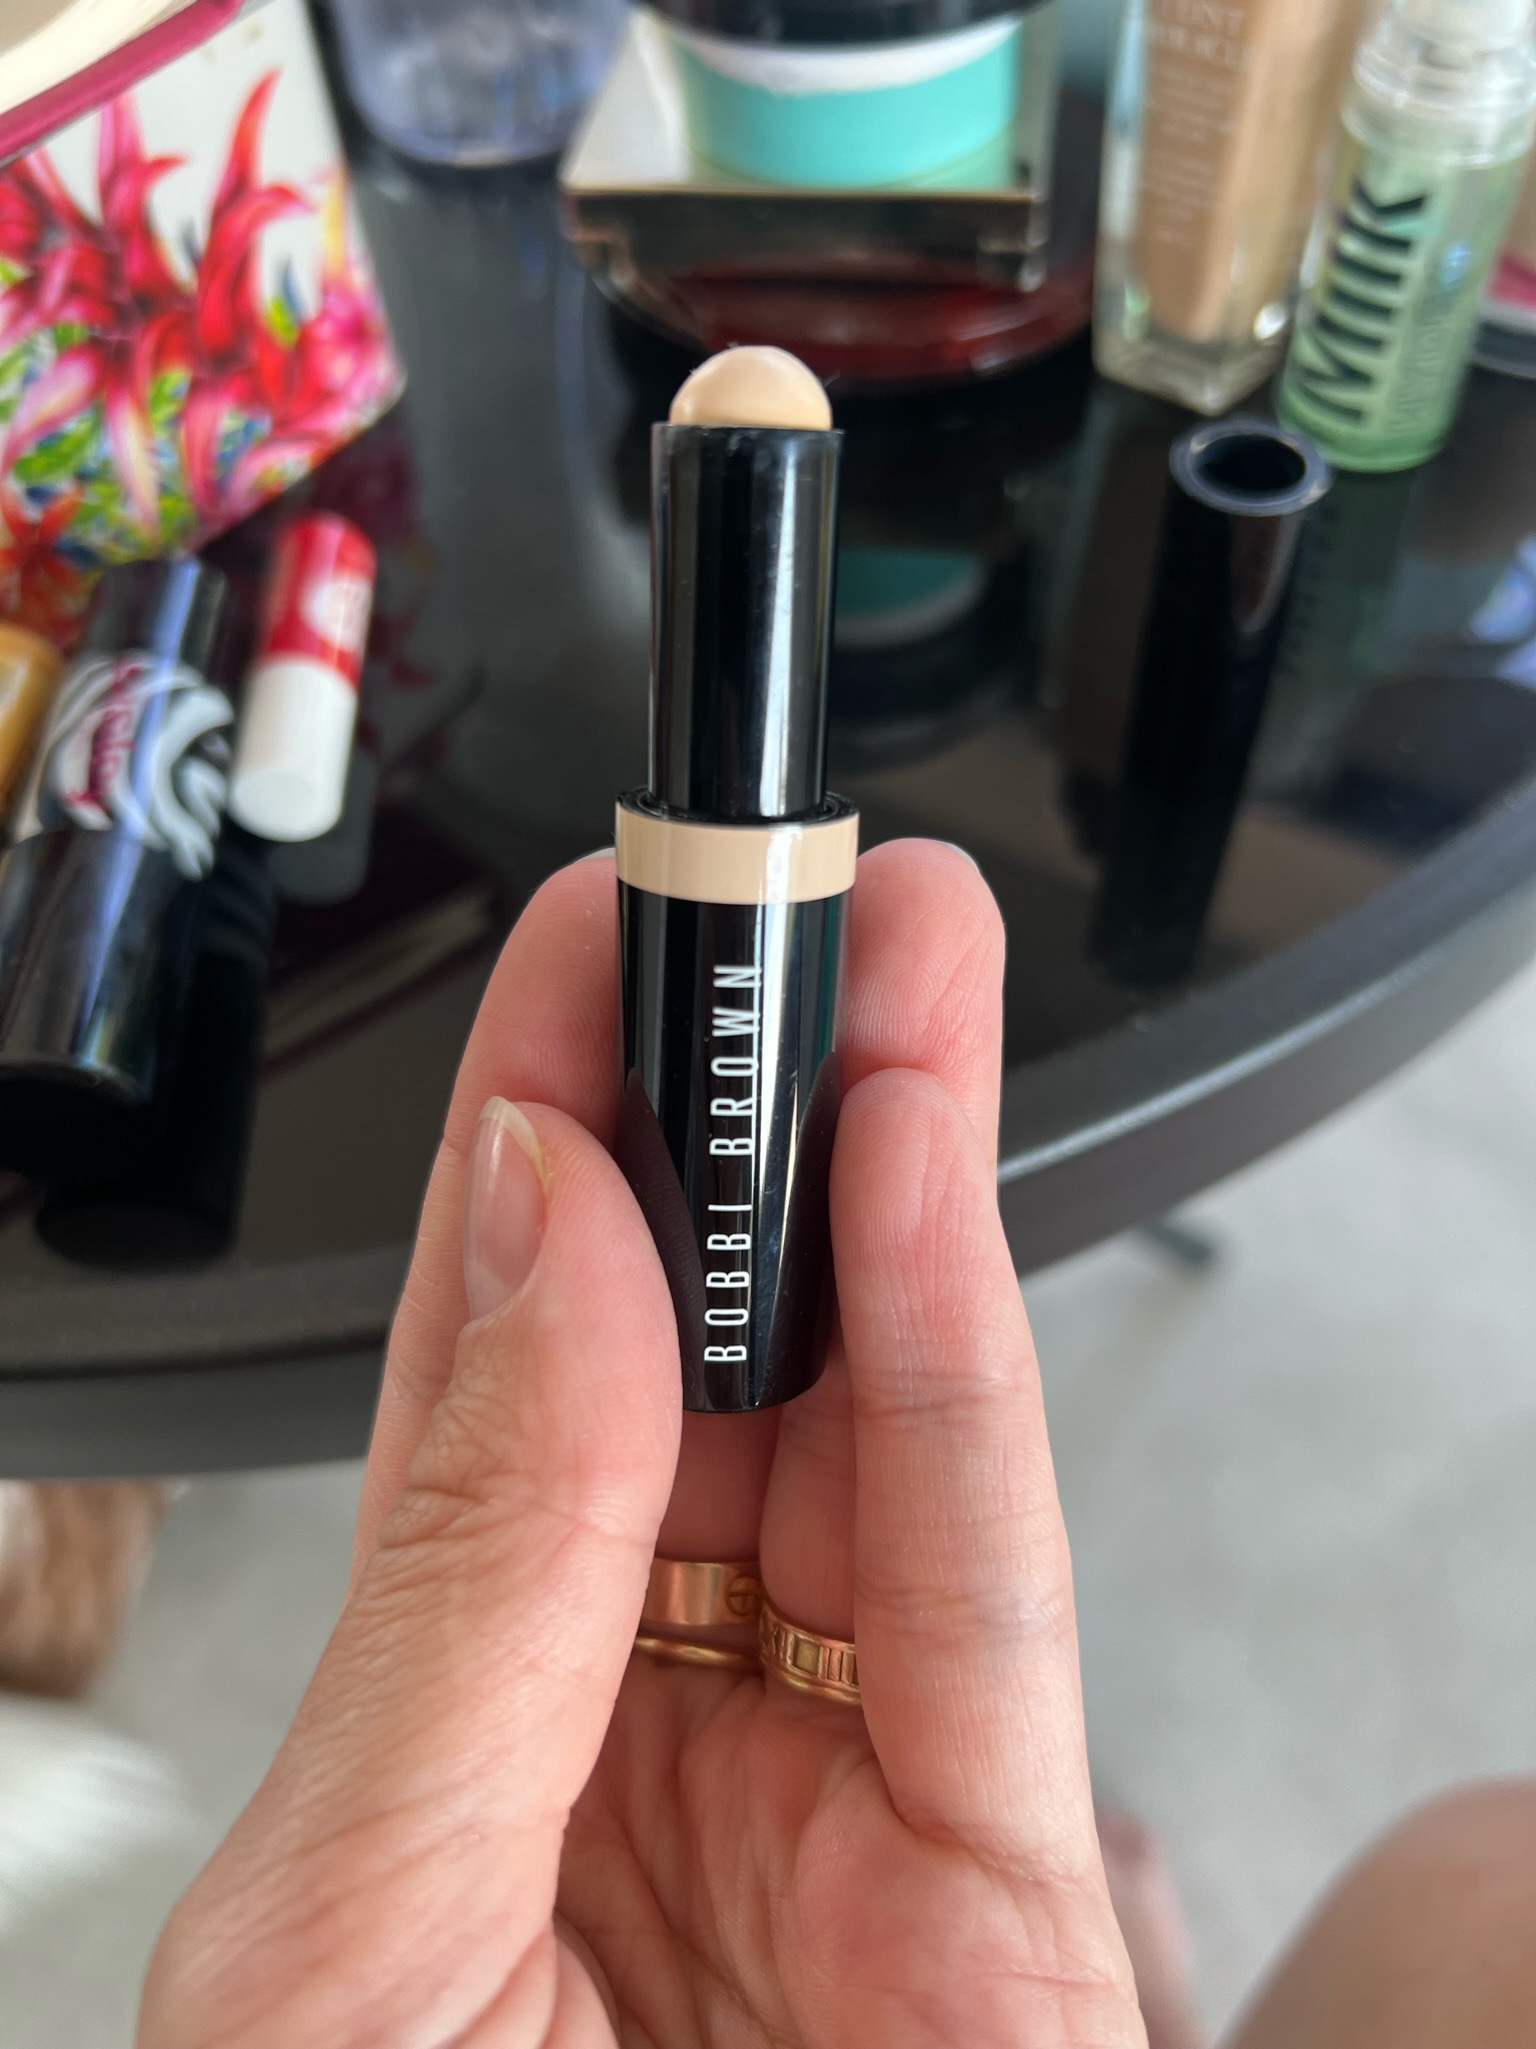 Review: Bobbi Brown Concealer Stick – A Miss for Me, But Maybe It’s My Fault?